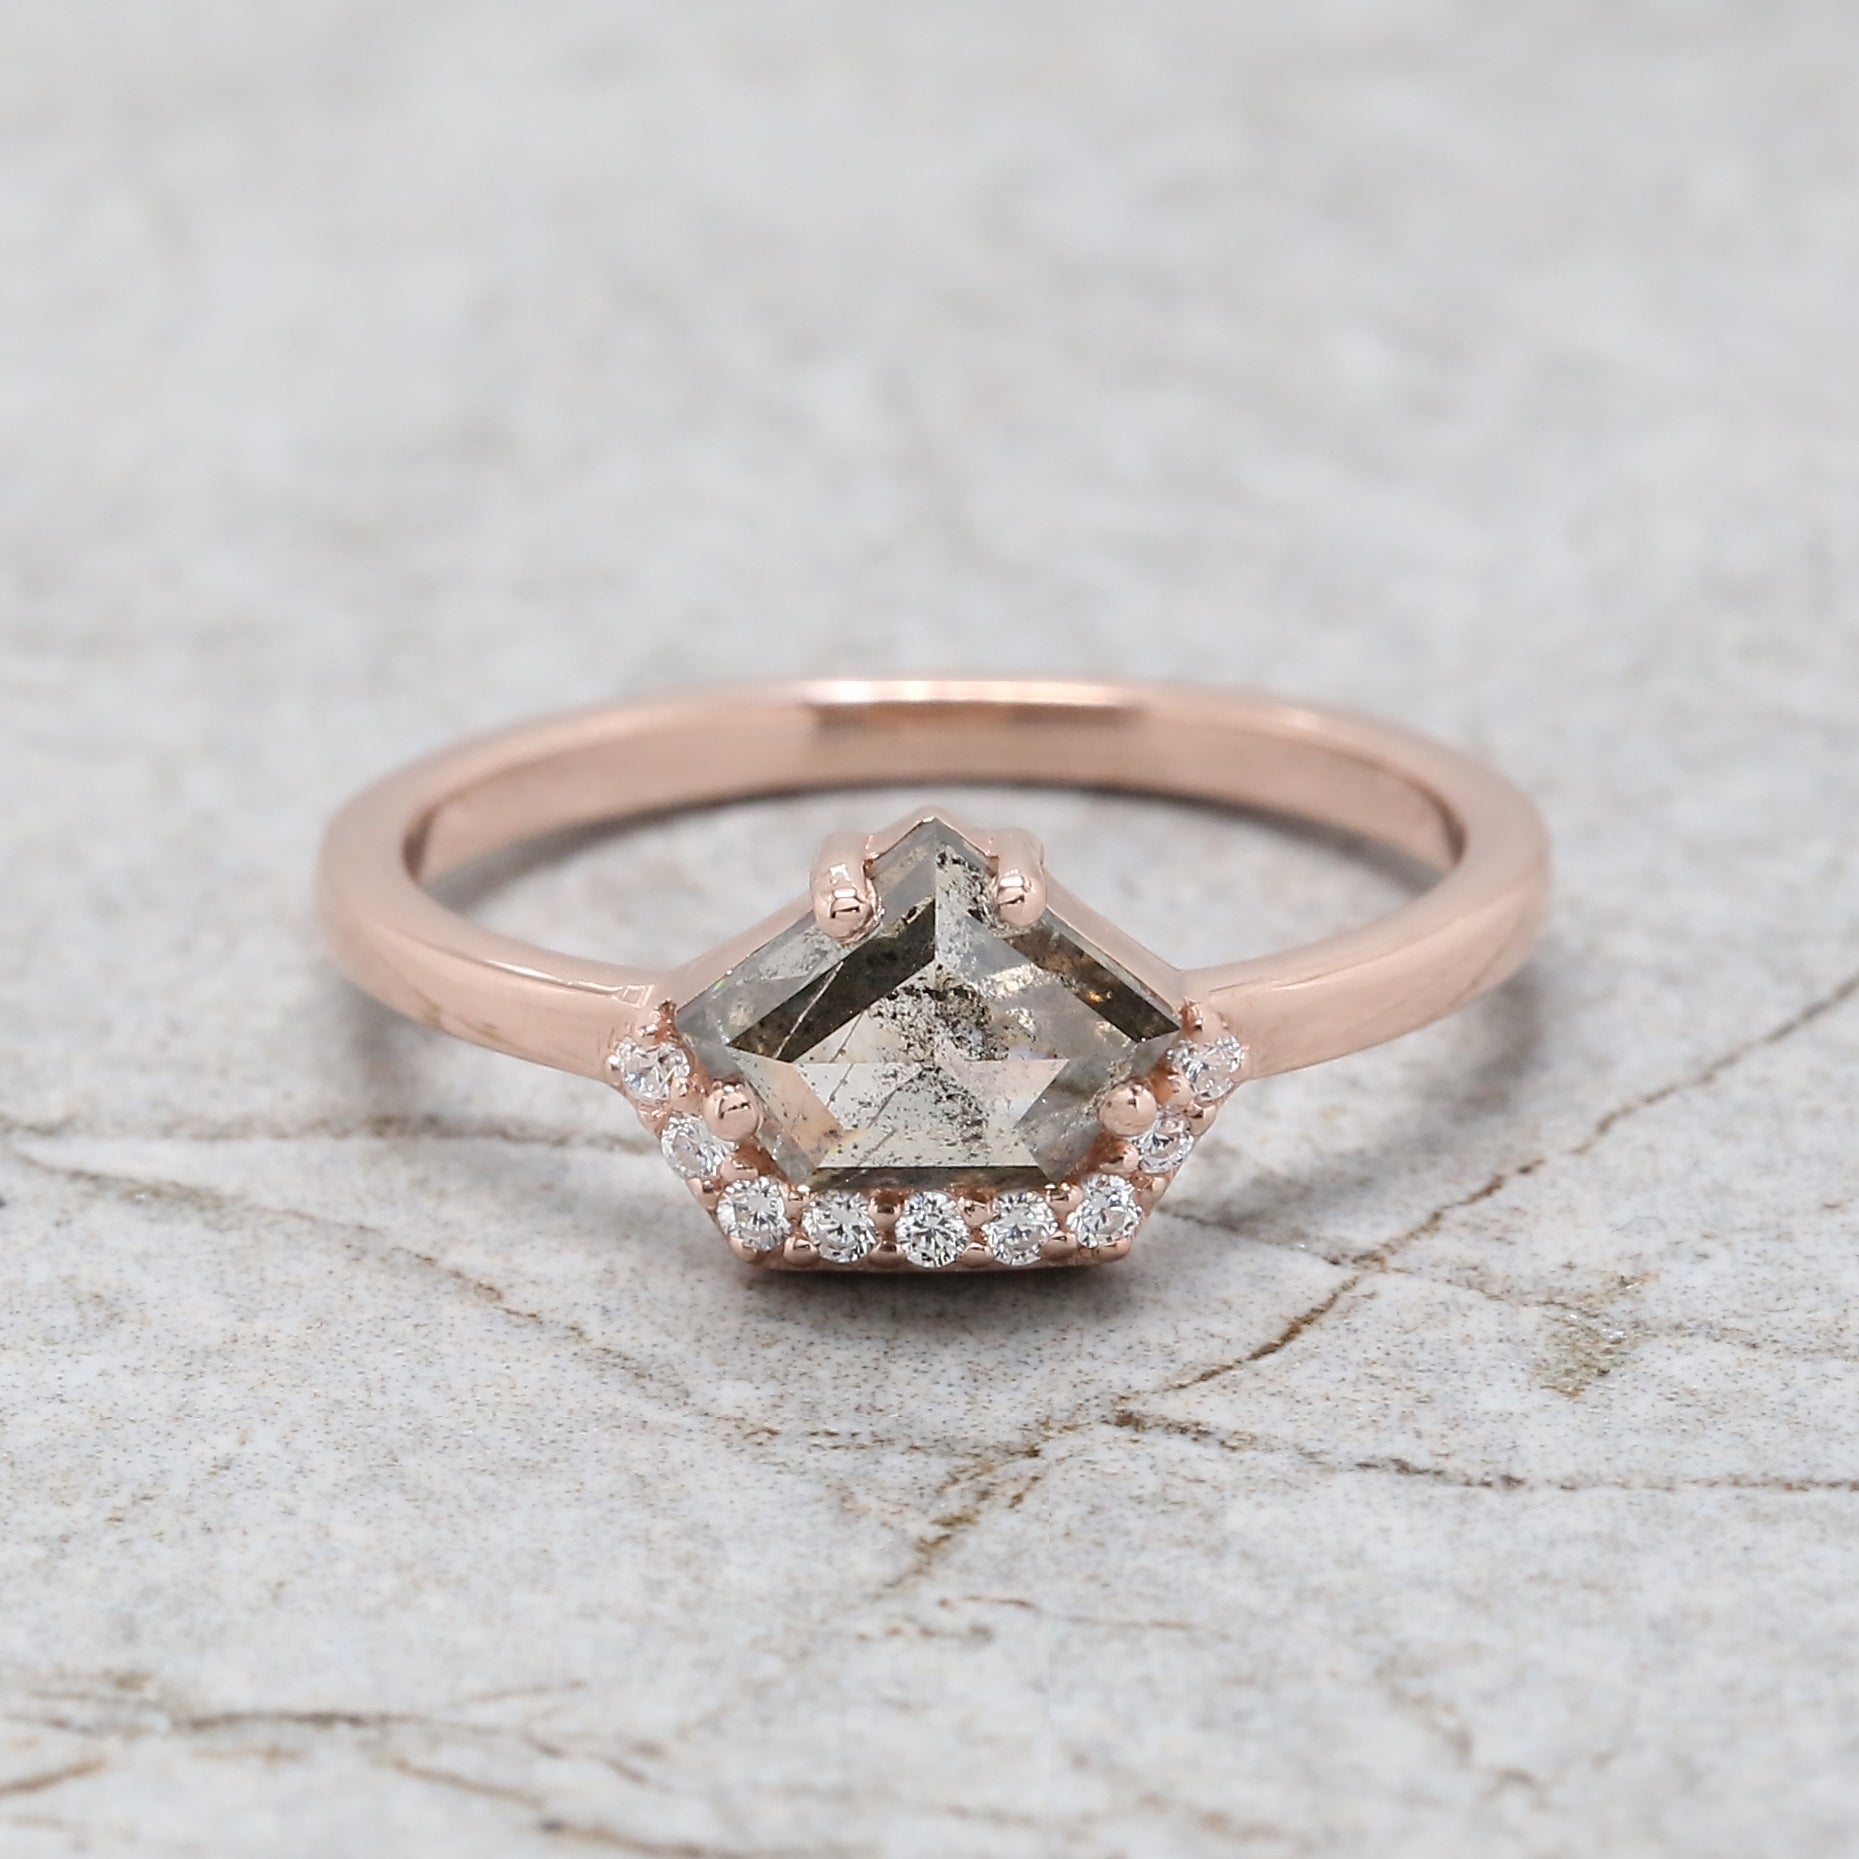 Shield Cut Salt And Pepper Diamond Ring 1.04 Ct 5.71 MM Shield Diamond Ring 14K Solid Rose Gold Silver Engagement Ring Gift For Her QL9520